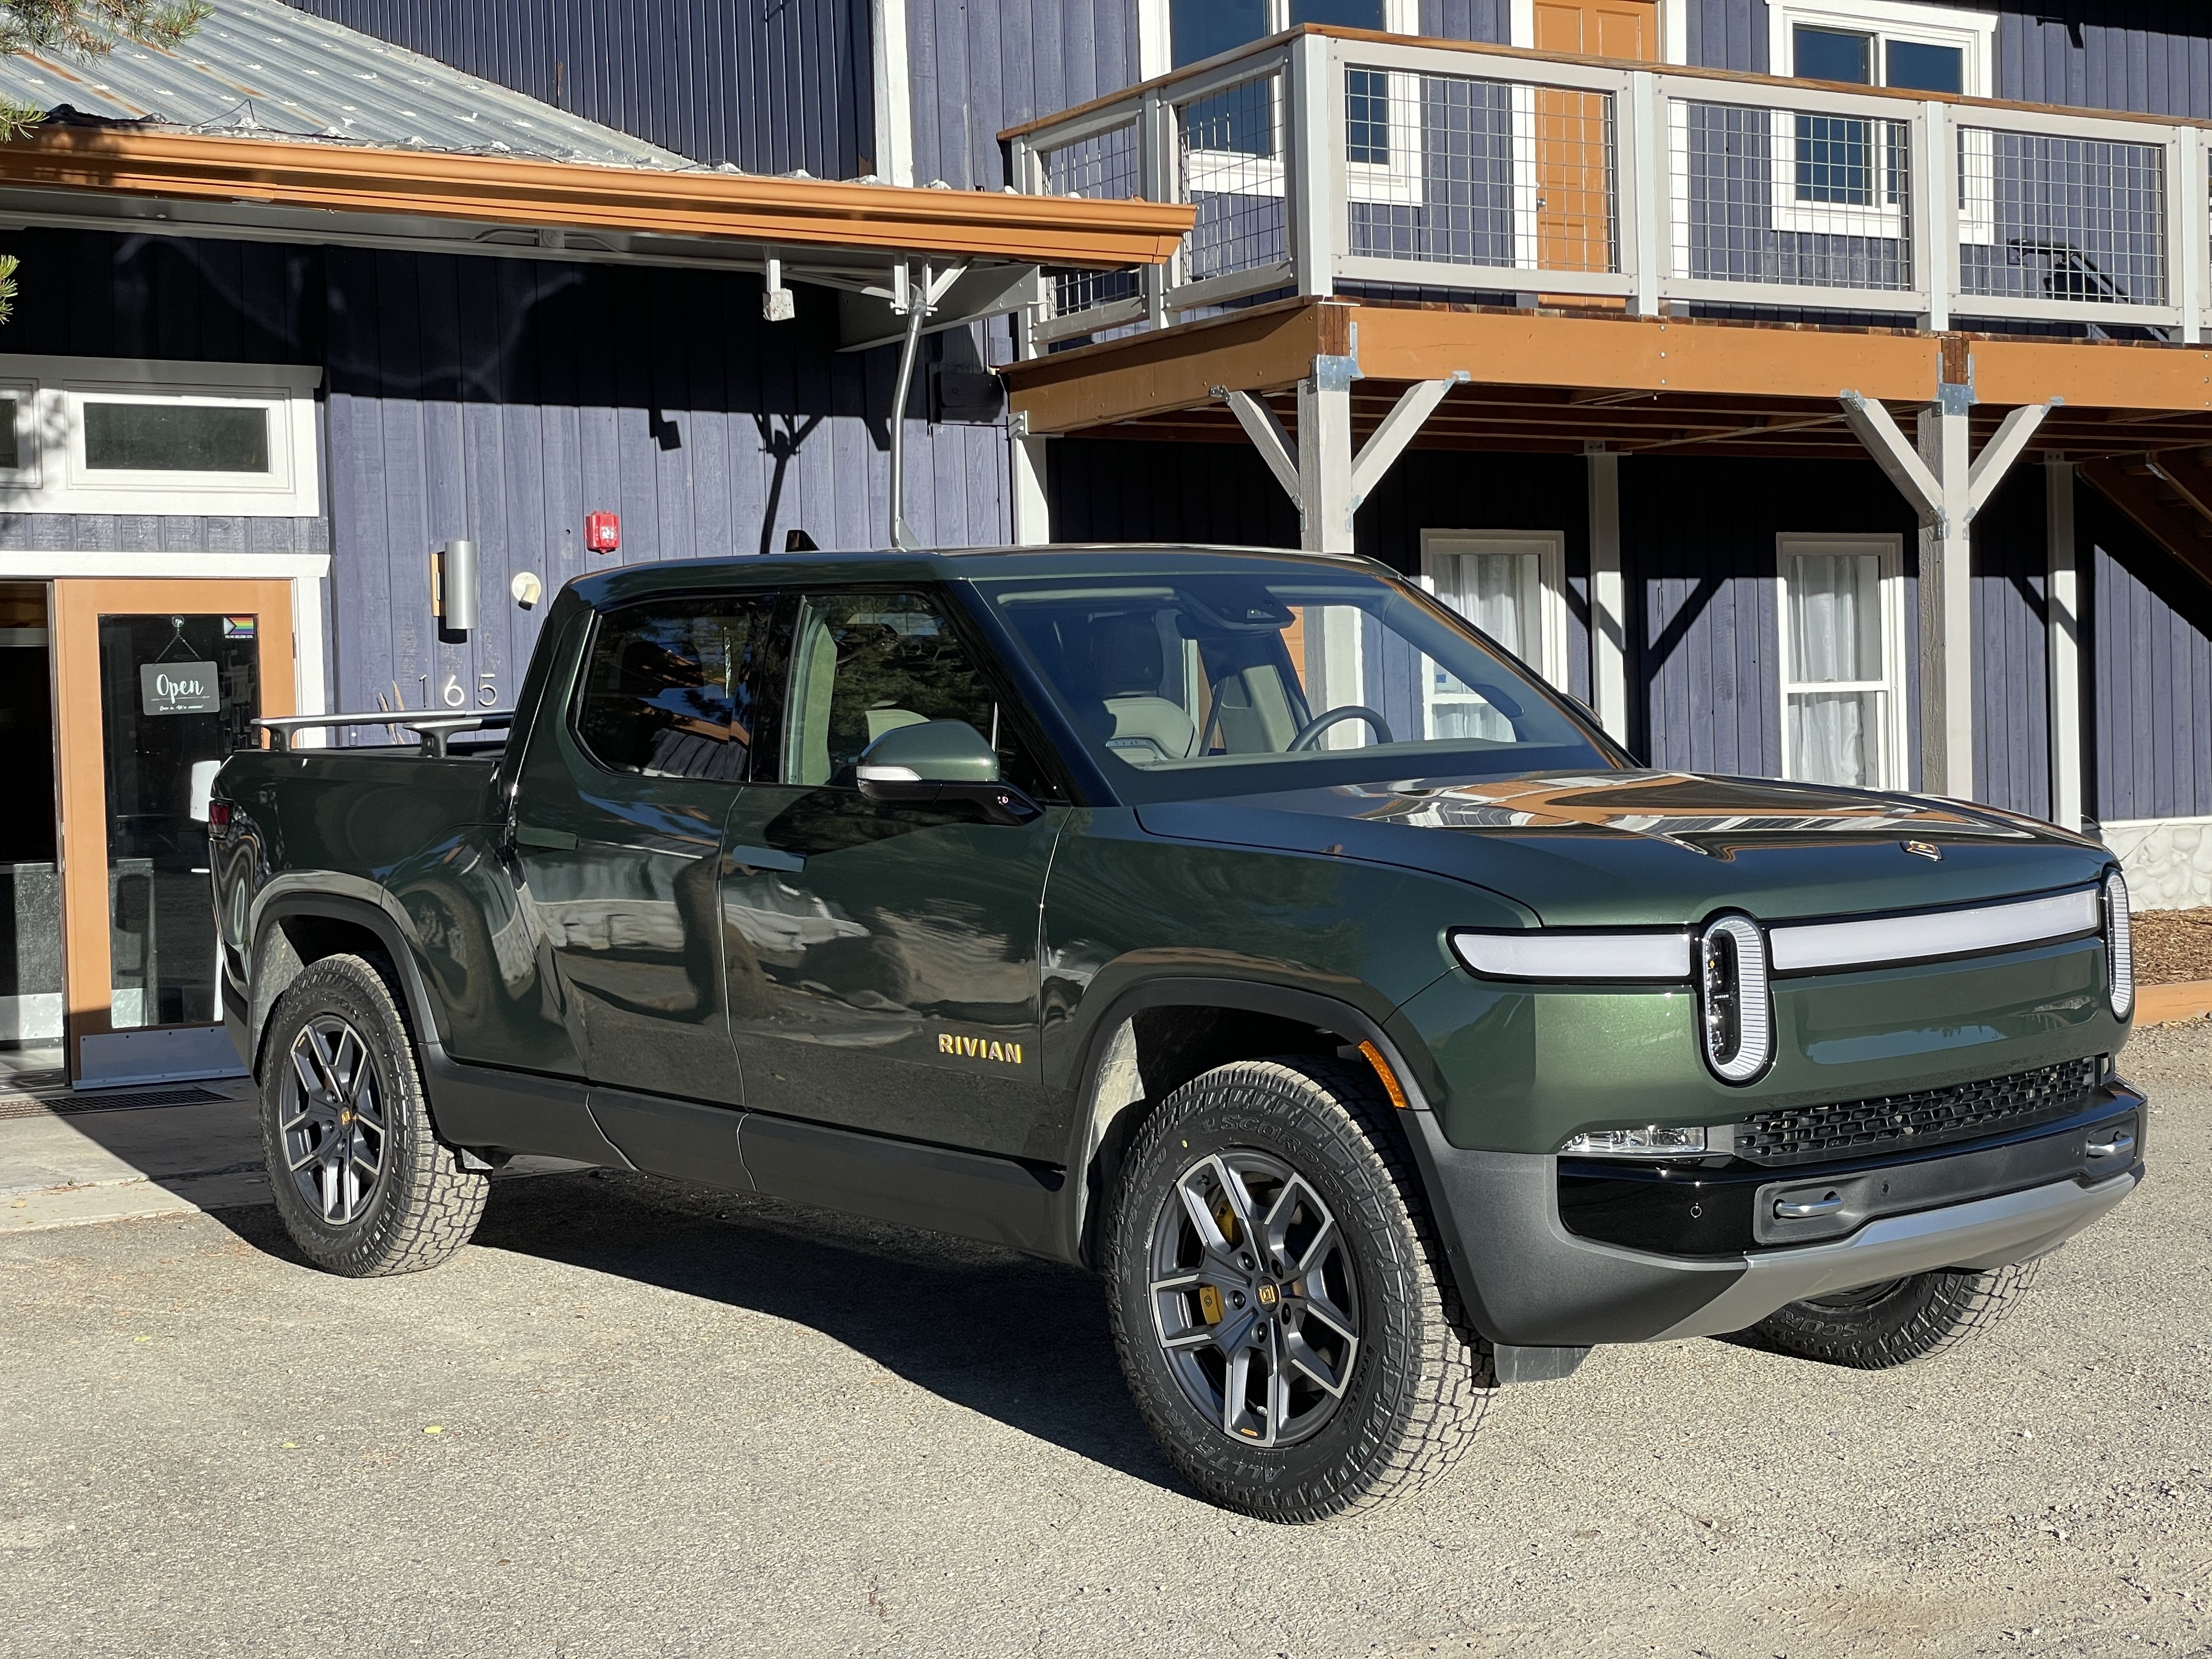 Rivian Showcases Exceptional Customer Service - Take Advantage of Preorder Benefits Now!